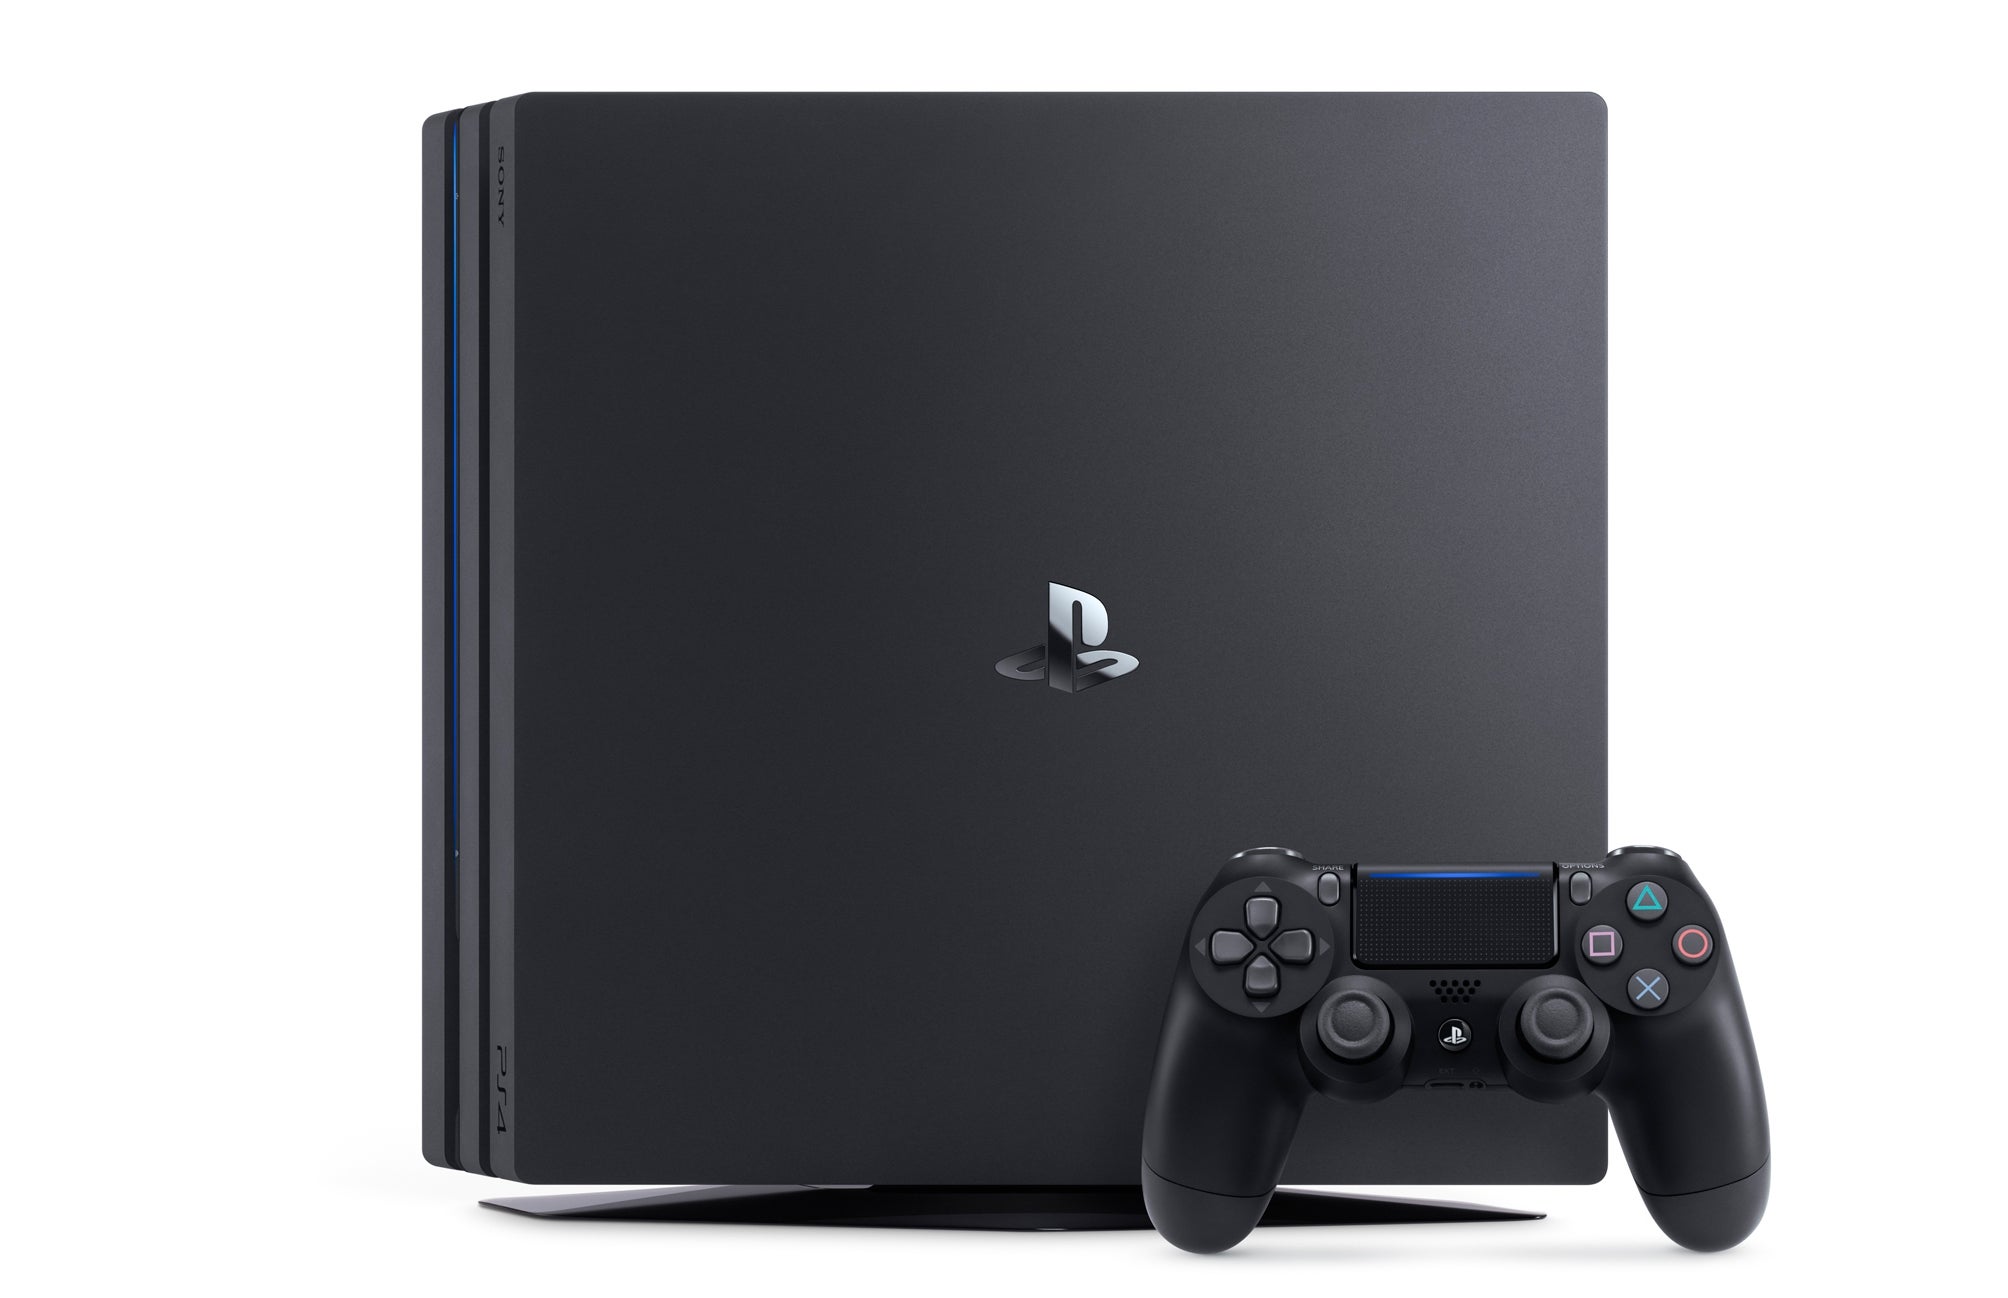 Image for Sony claims PS4 Pro's upscaled 4K gaming is not misleading